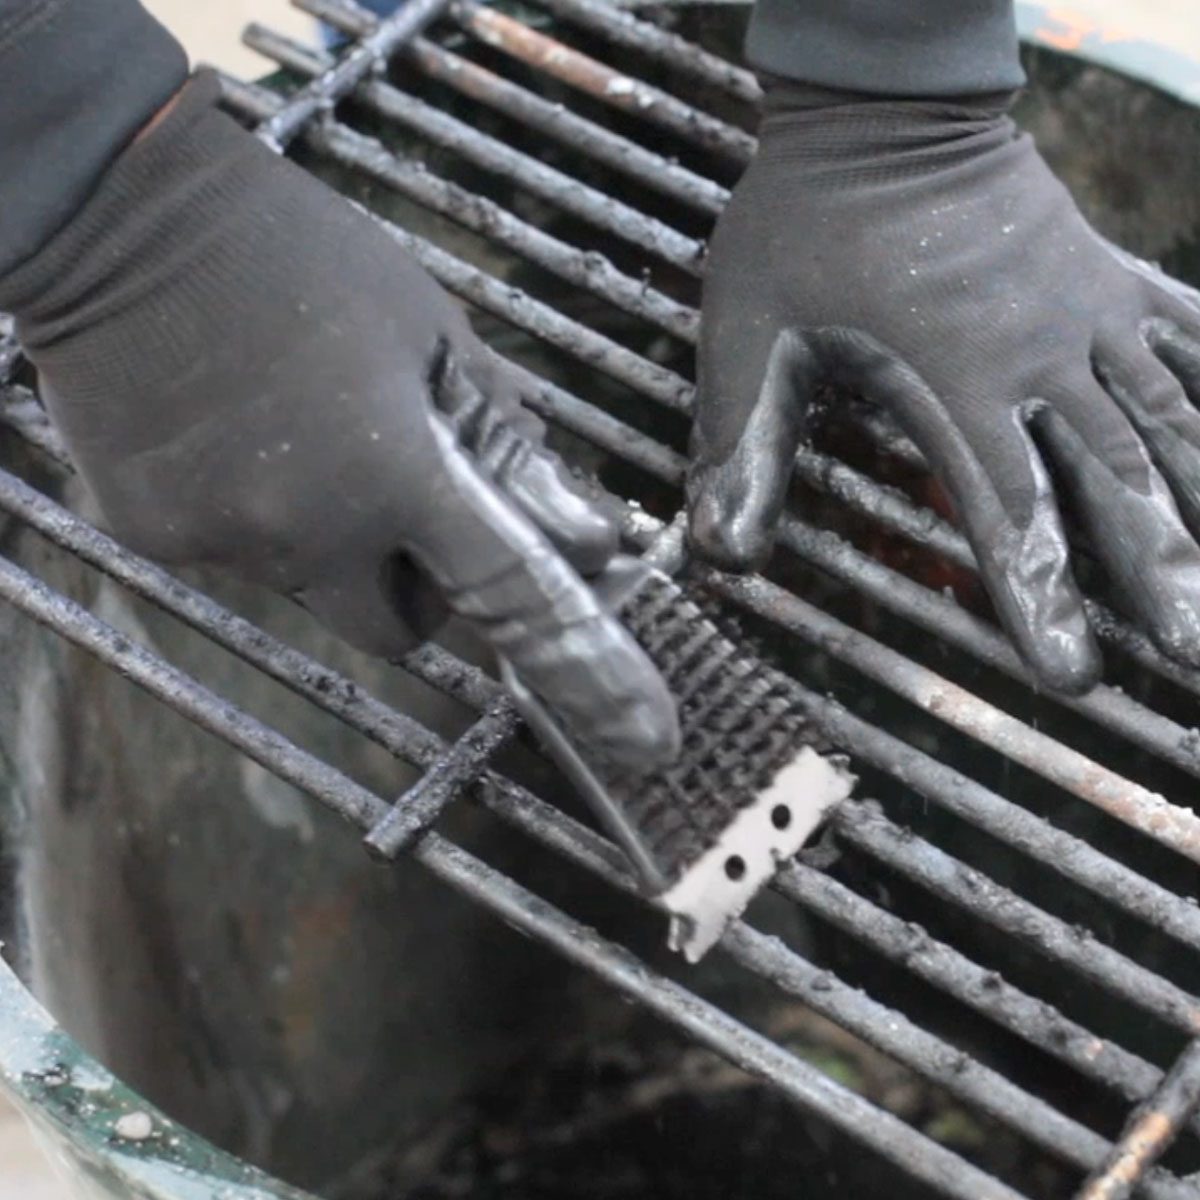 4 Tips to Reduce Grill Cleaning Time